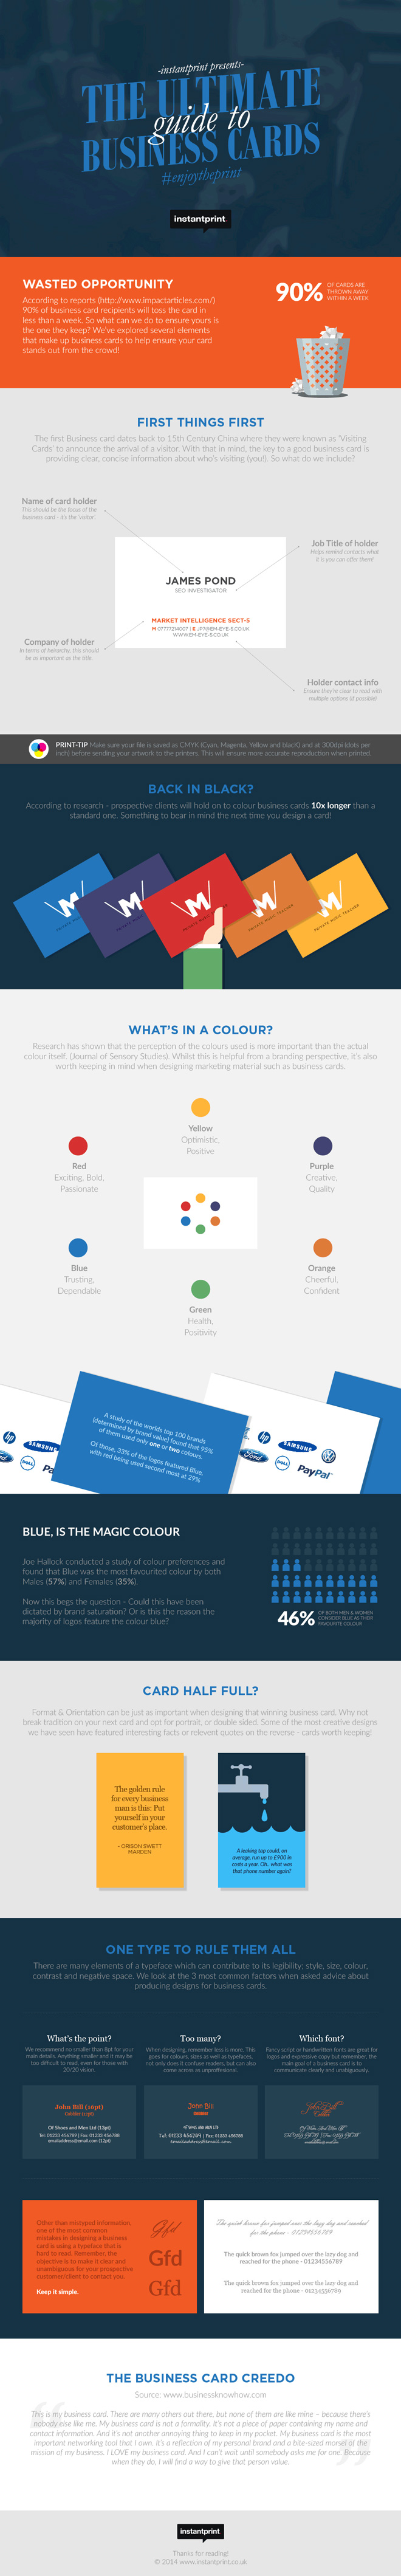 business card design guide